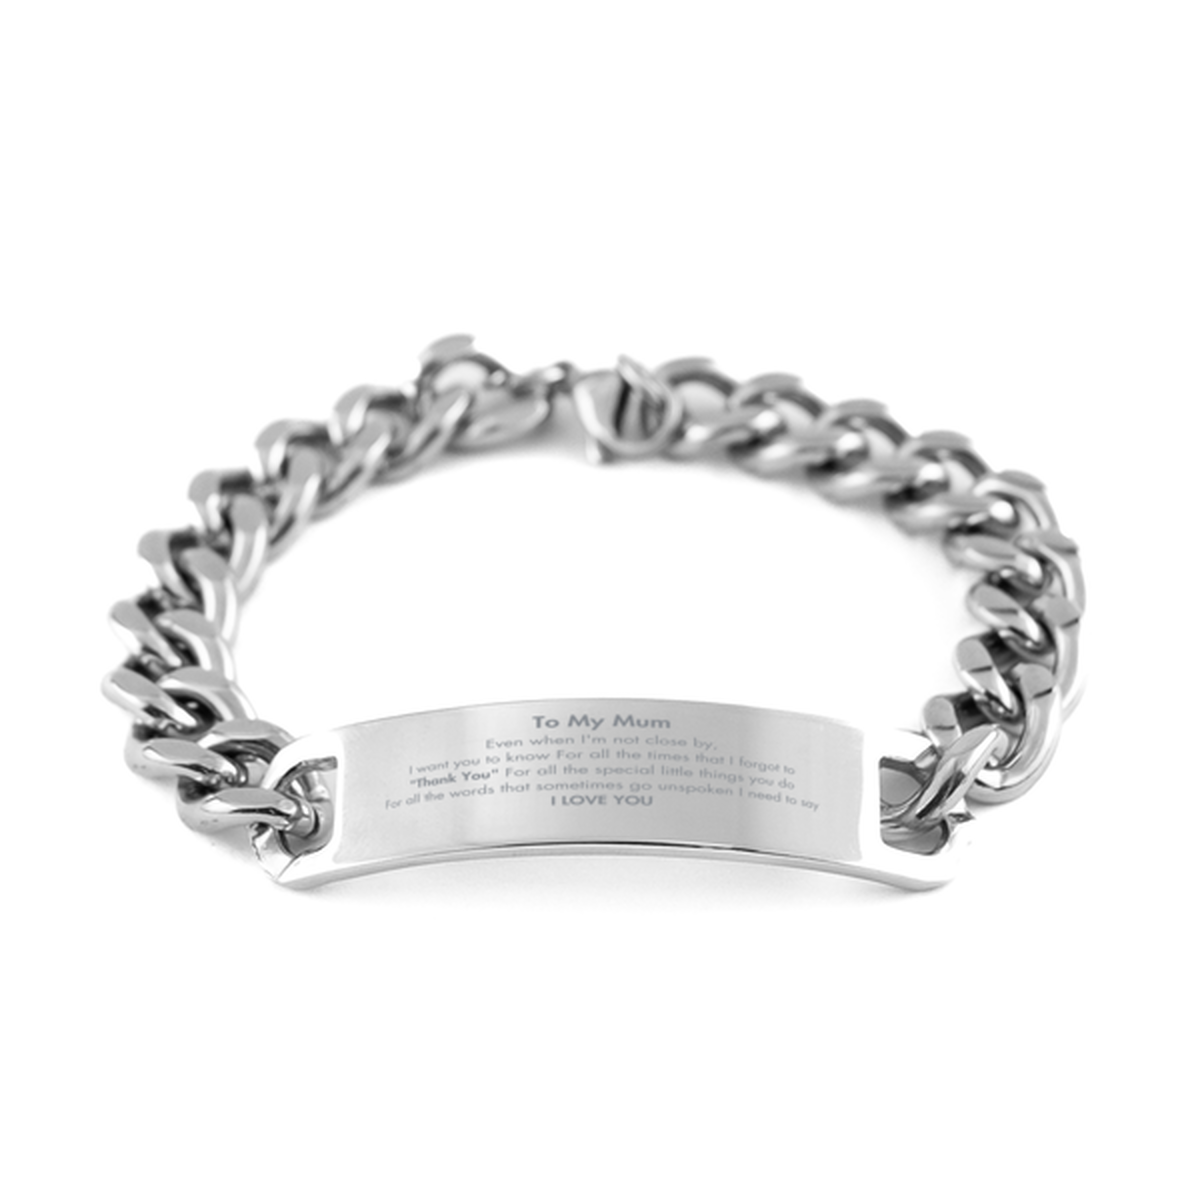 Thank You Gifts for Mum, Keepsake Cuban Chain Stainless Steel Bracelet Gifts for Mum Birthday Mother's day Father's Day Mum For all the words That sometimes go unspoken I need to say I LOVE YOU